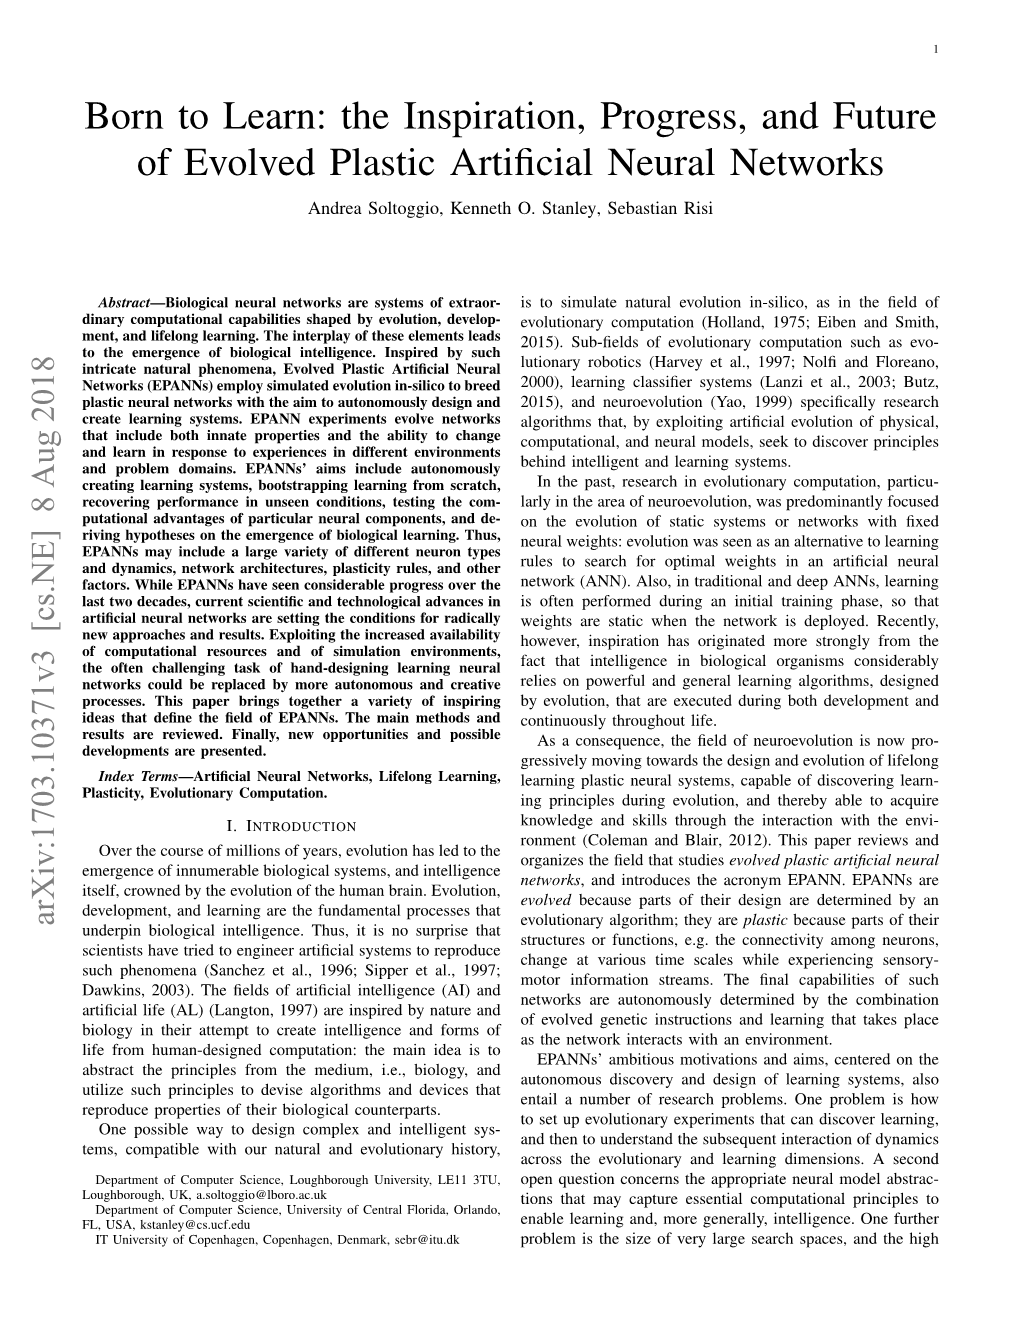 The Inspiration, Progress, and Future of Evolved Plastic Artificial Neural